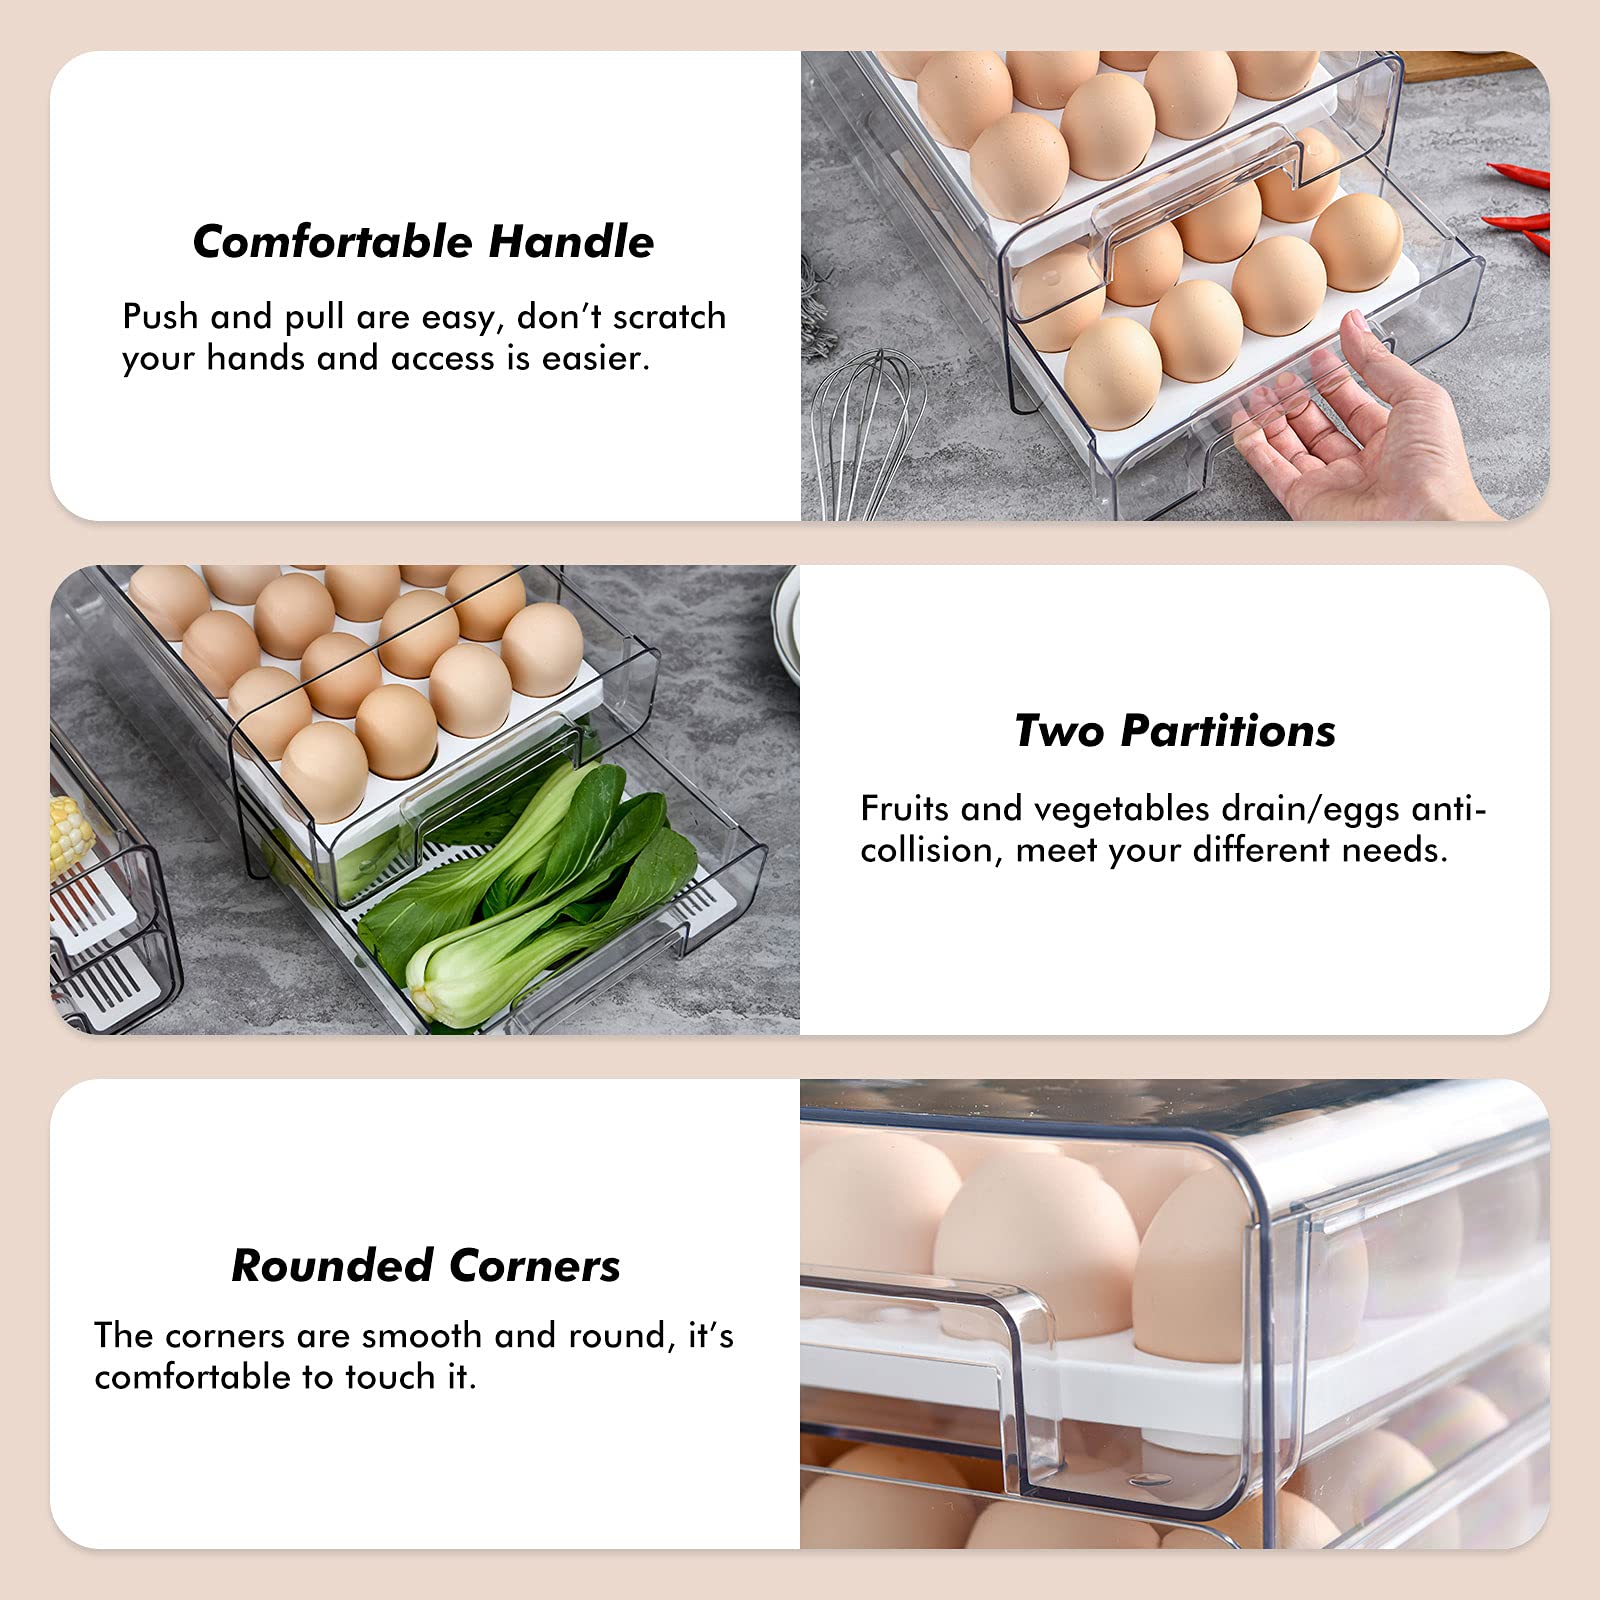 elabo 32 Grid Large Capacity Egg Holder for Refrigerator, Stackable Refrigerator Organizer Drawers with Removable Drain Tray, Fridge Organizer Bins, Pull Out Food Storage Container Bins with Drawers